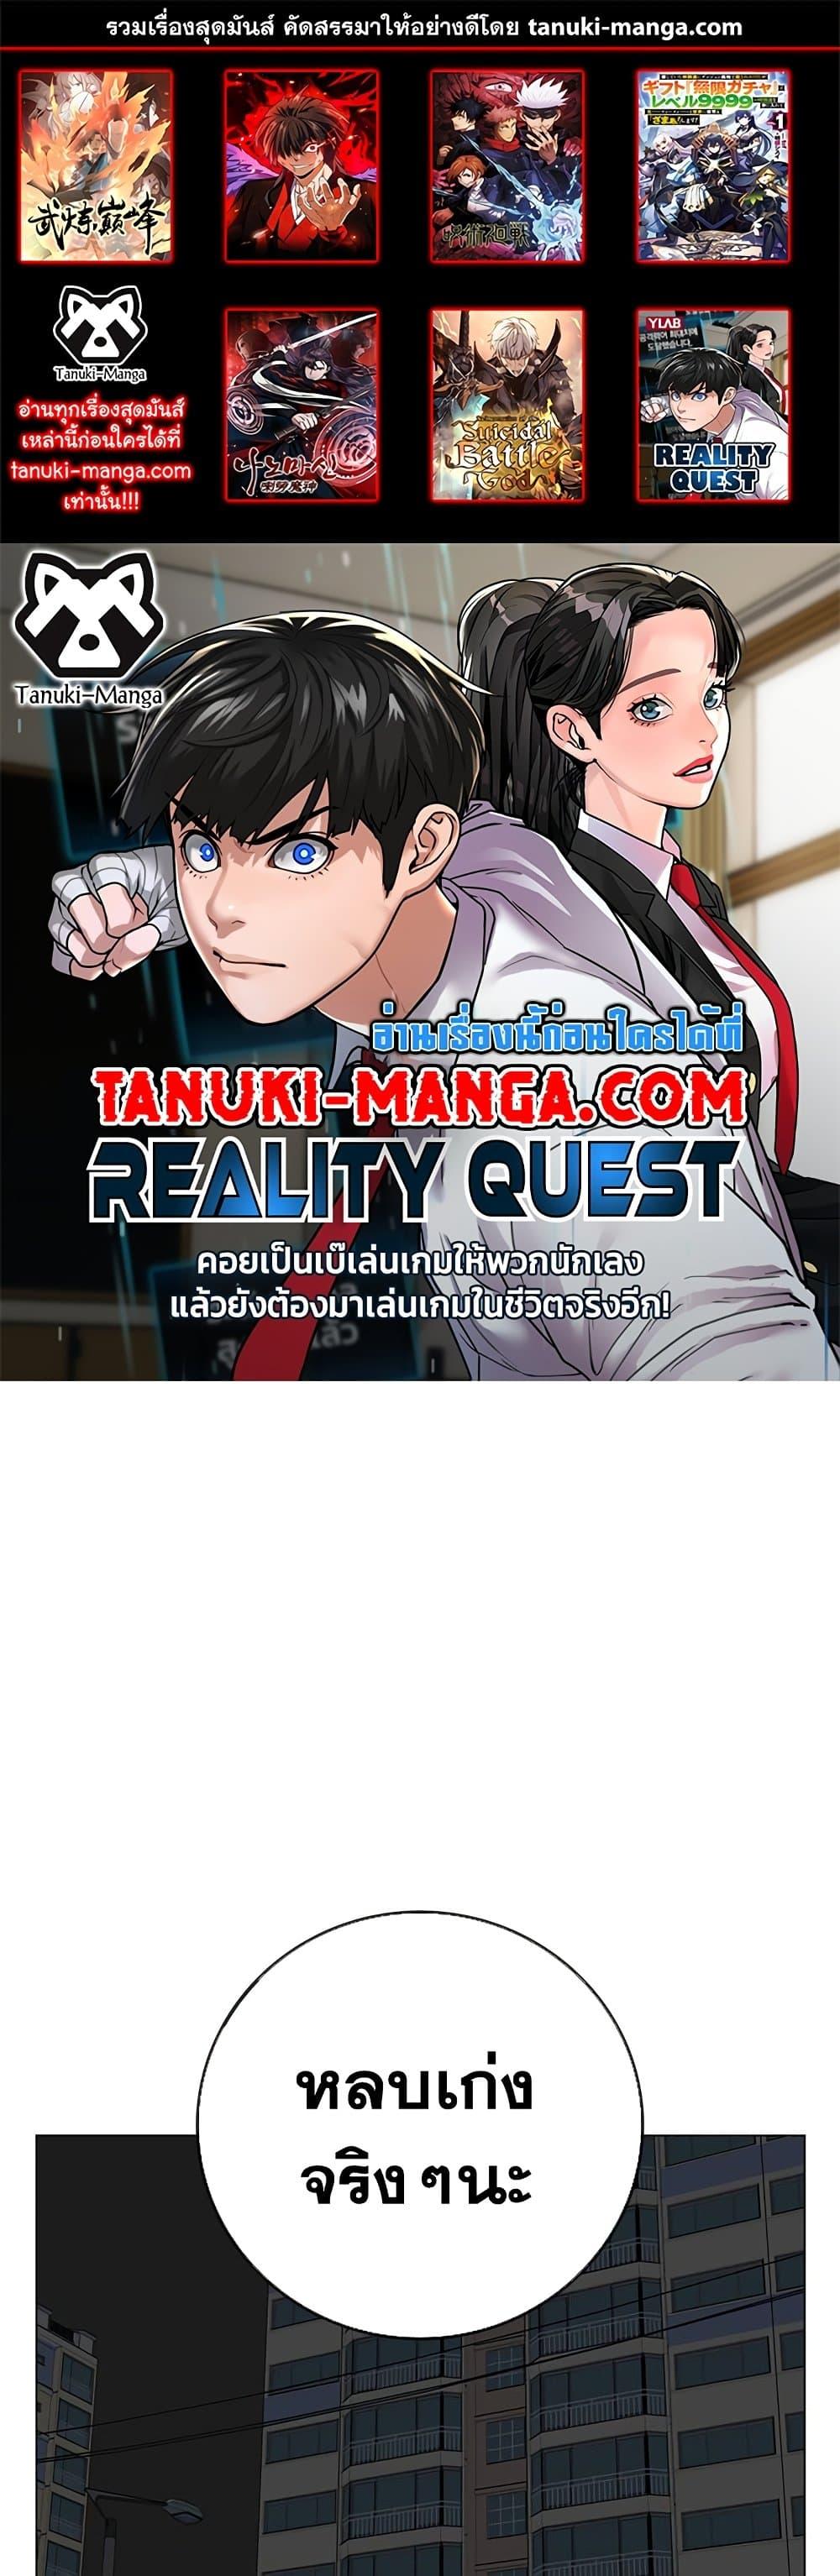 Reality Quest 85 01